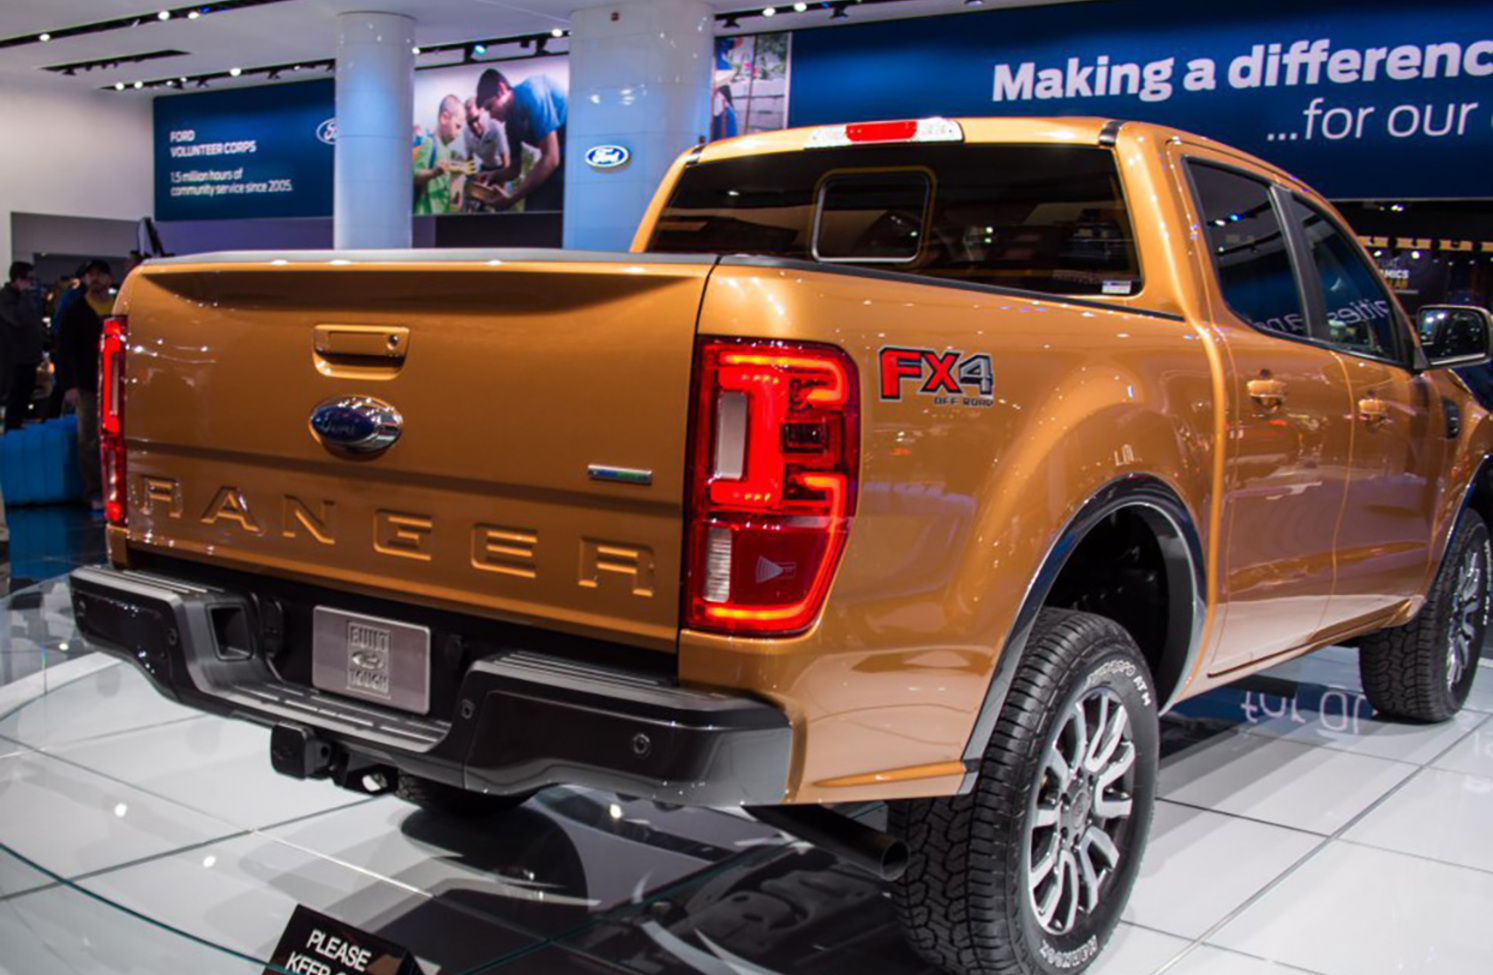 Ford Ranger IV SuperCrew (Americas) 2.3 EcoBoost (270 Hp) Automatic 2019, 2020, 2021 